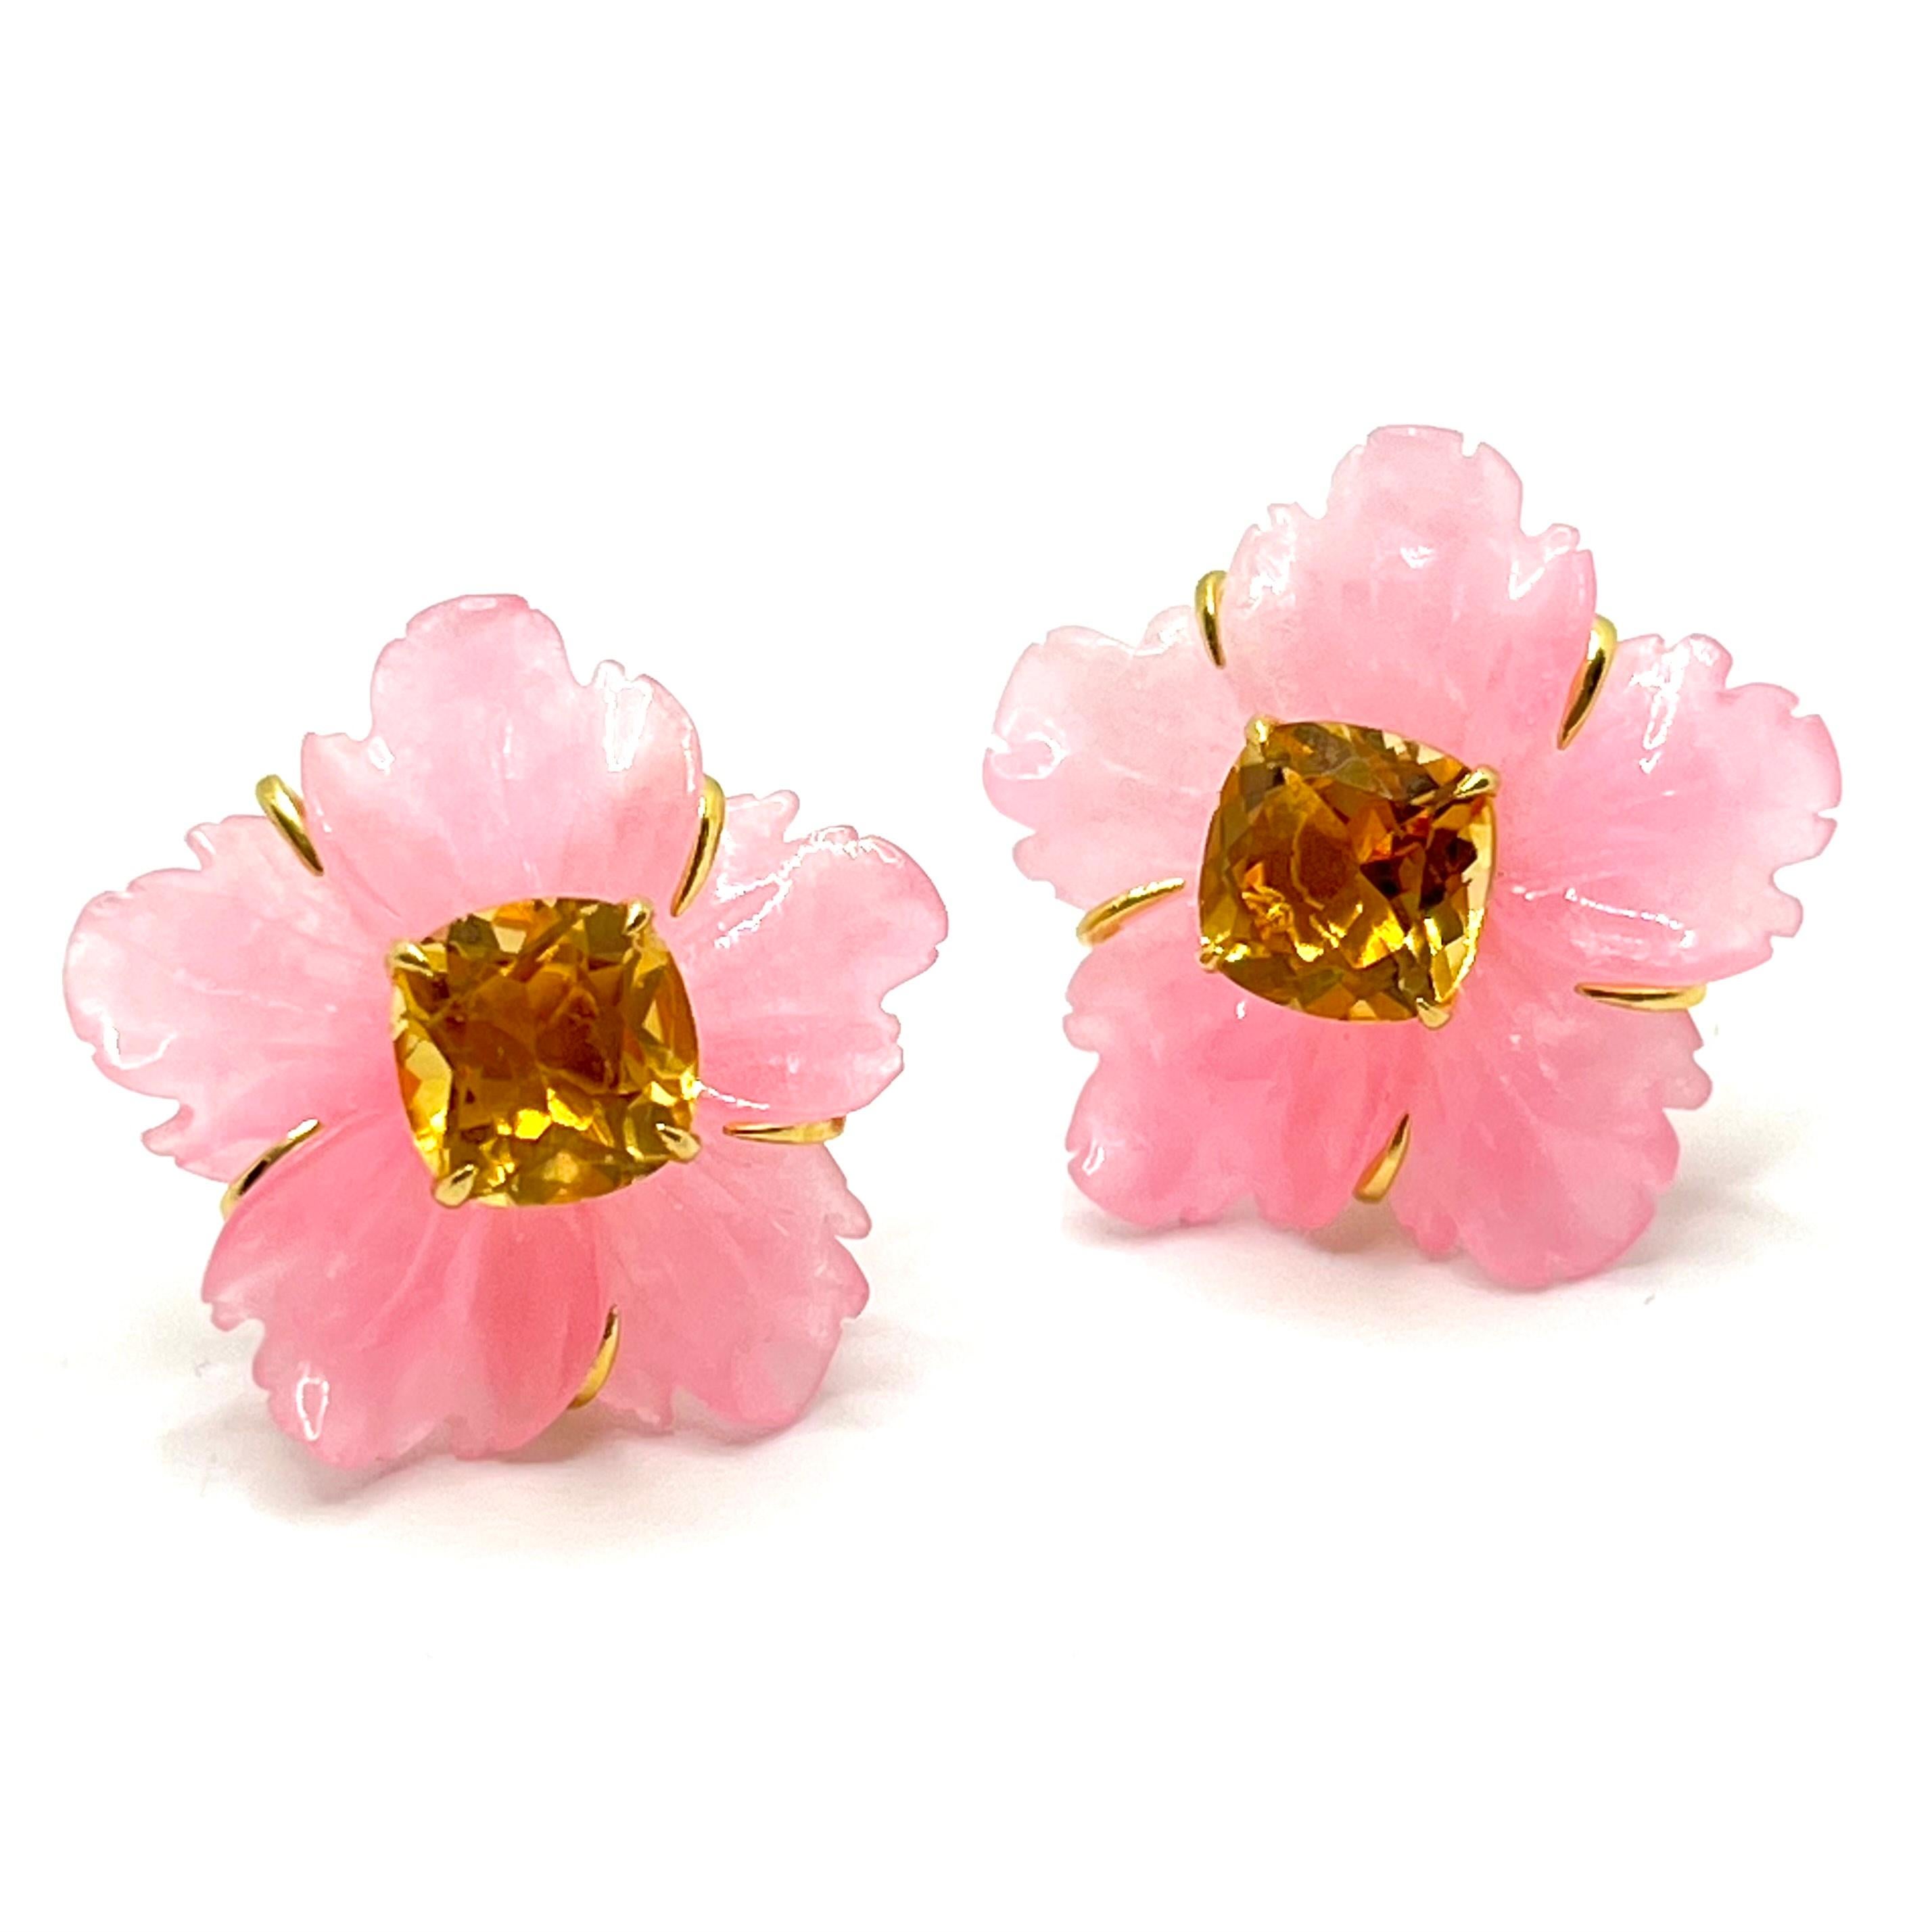 Bijoux Num's Elegant 25mm Carved Pink Quartzite Flower and Cushion-cut Citrine Earrings

This gorgeous pair of earrings features 25mm pink quartzite carved into beautiful three dimension flower, adorned with cushion-cut citrine (3 carat size) in the